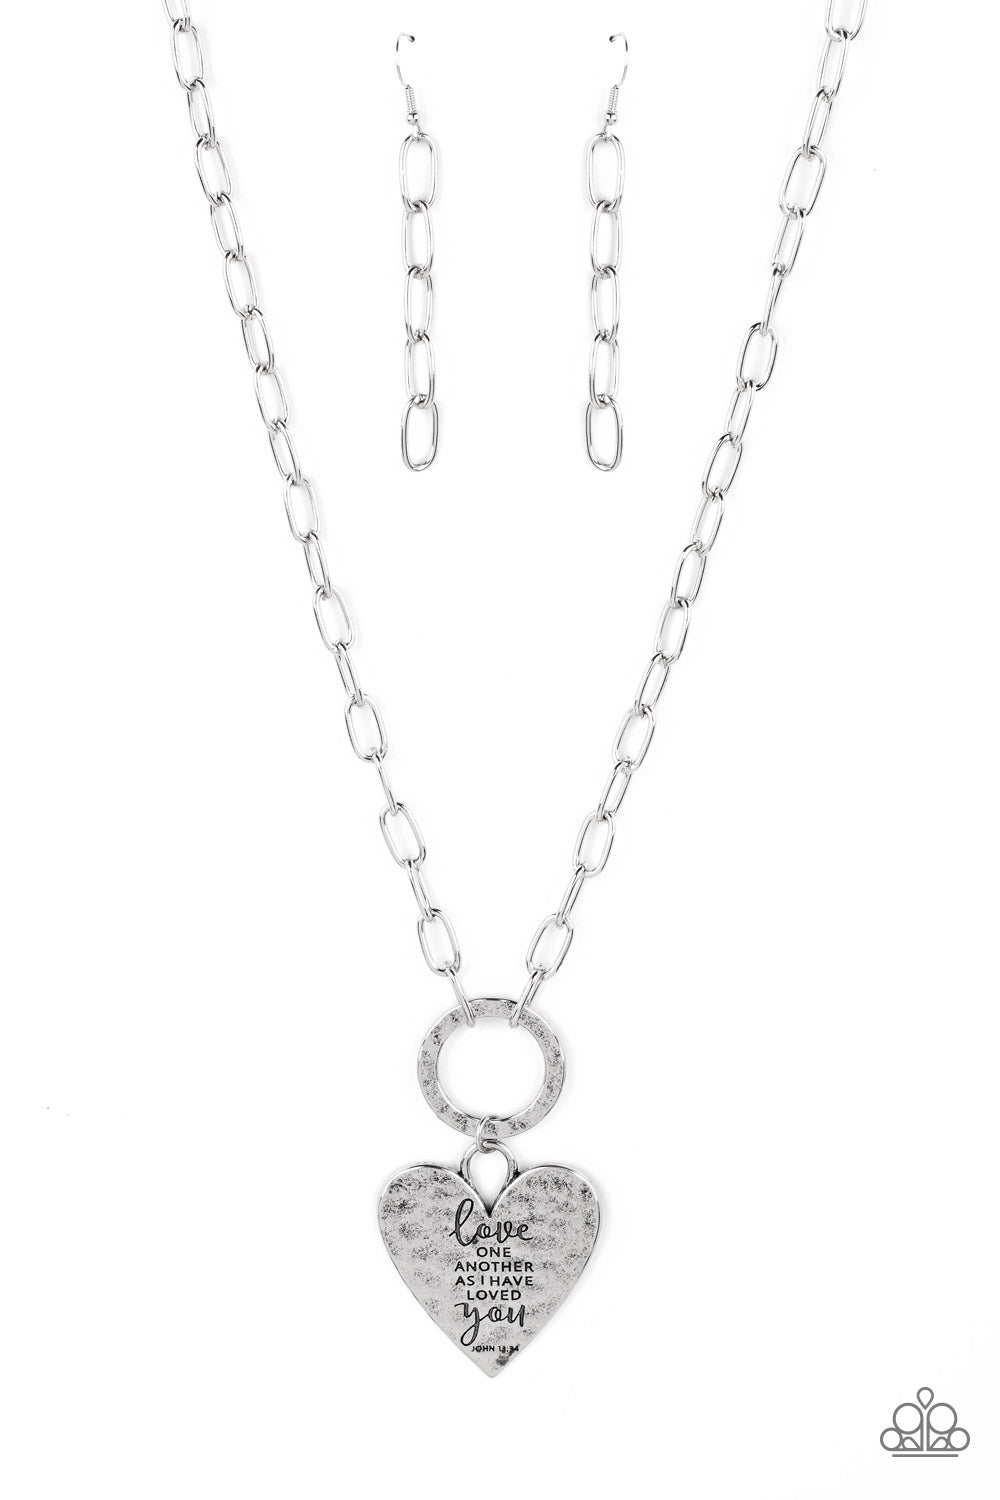 Brotherly Love - silver - Paparazzi necklace